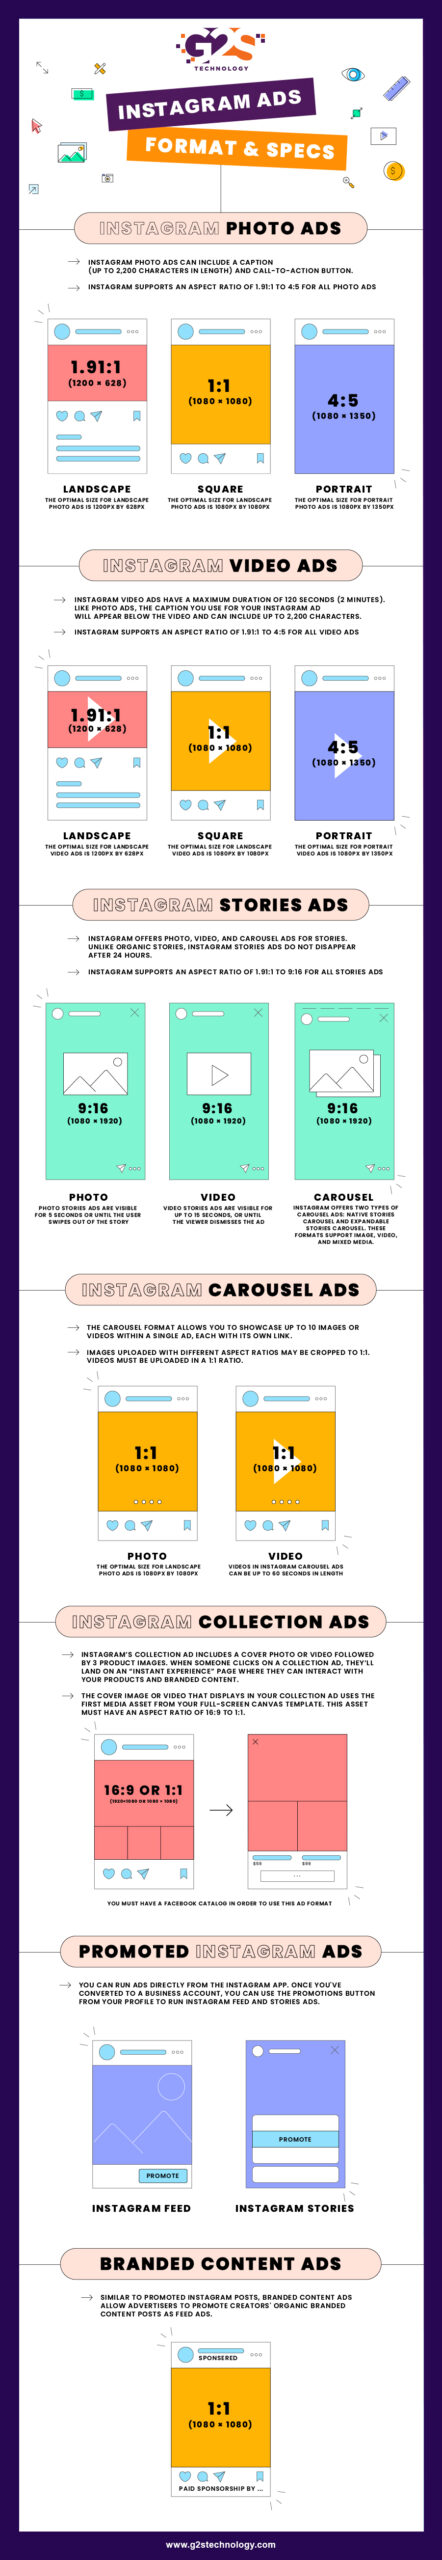 InstagramAds Format Specification Infographic